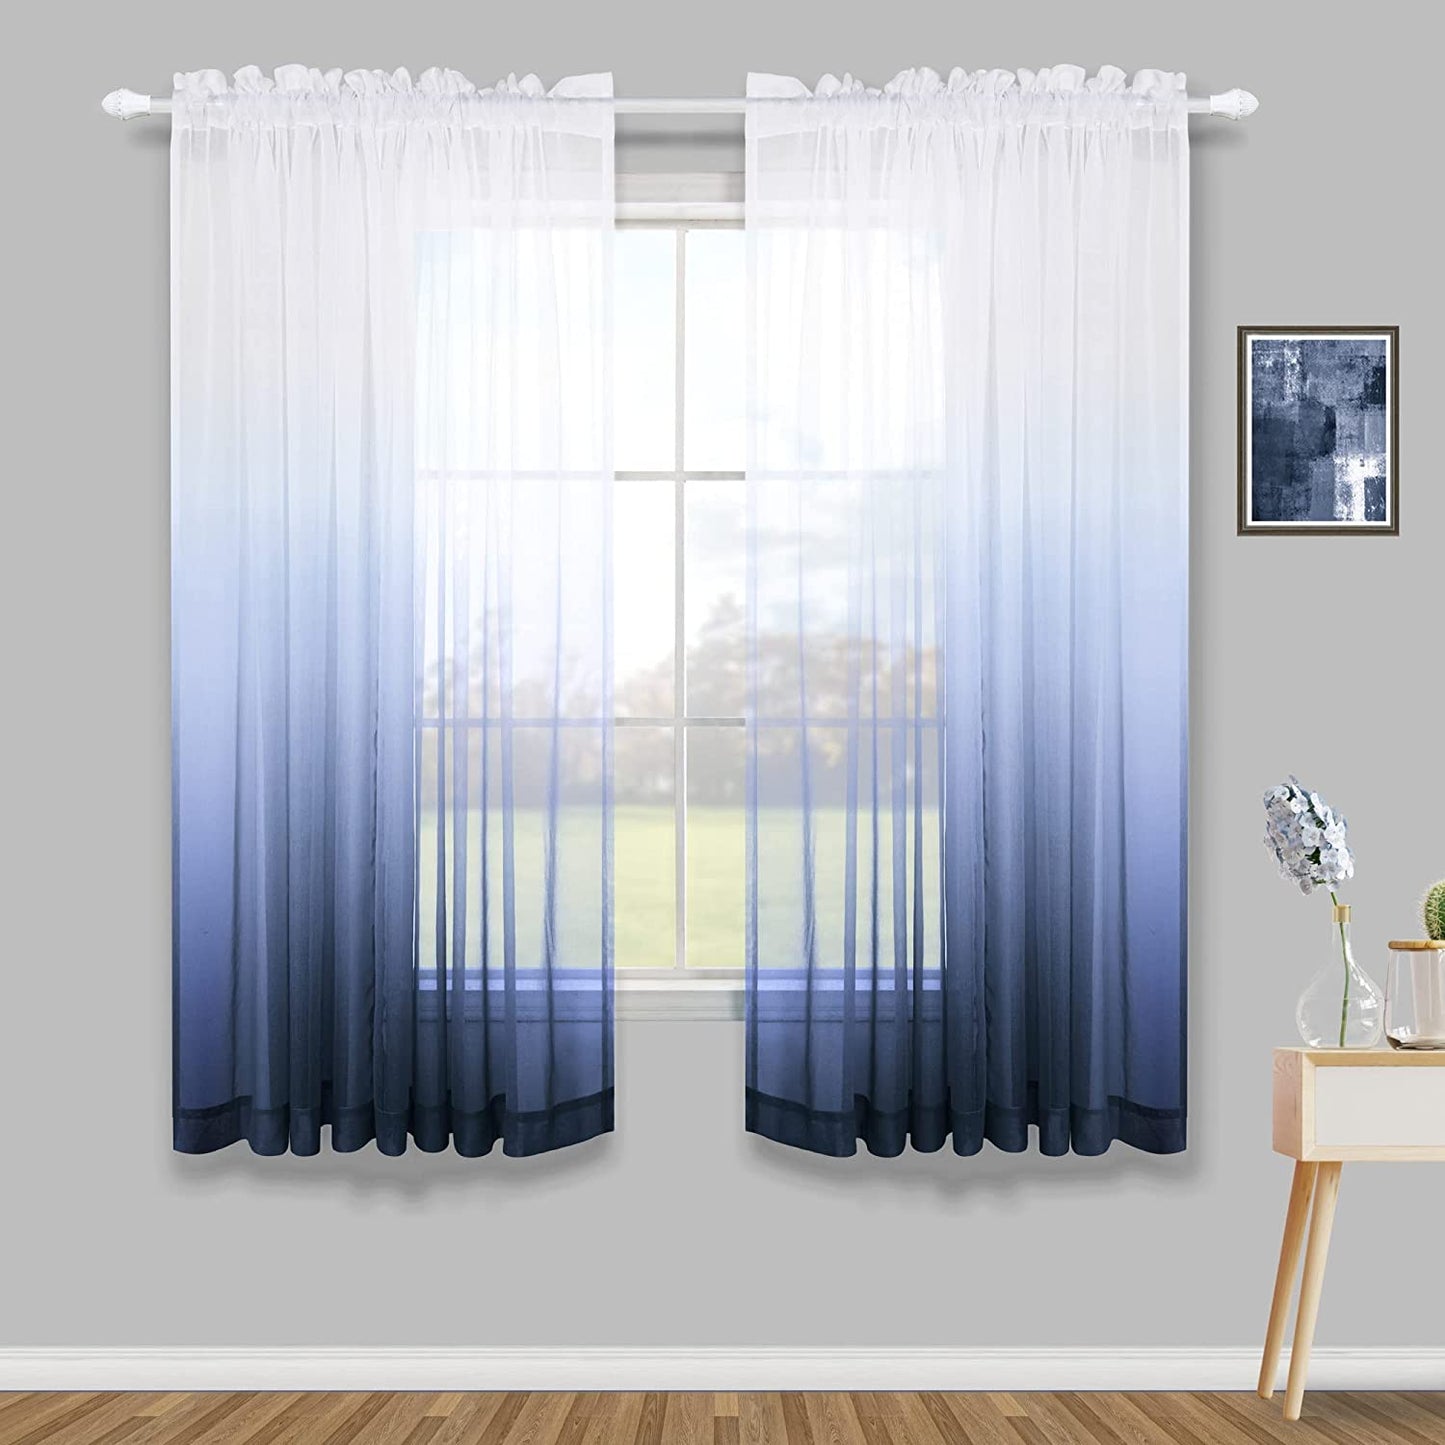 KOUFALL Sage Green Curtains 63 Inch Length for Living Room,2 Panel Set Rod Pocket Boho Curtains for Bedroom 63 Inches Long  KOUFALL TEXTILE Navy Blue 52X63 